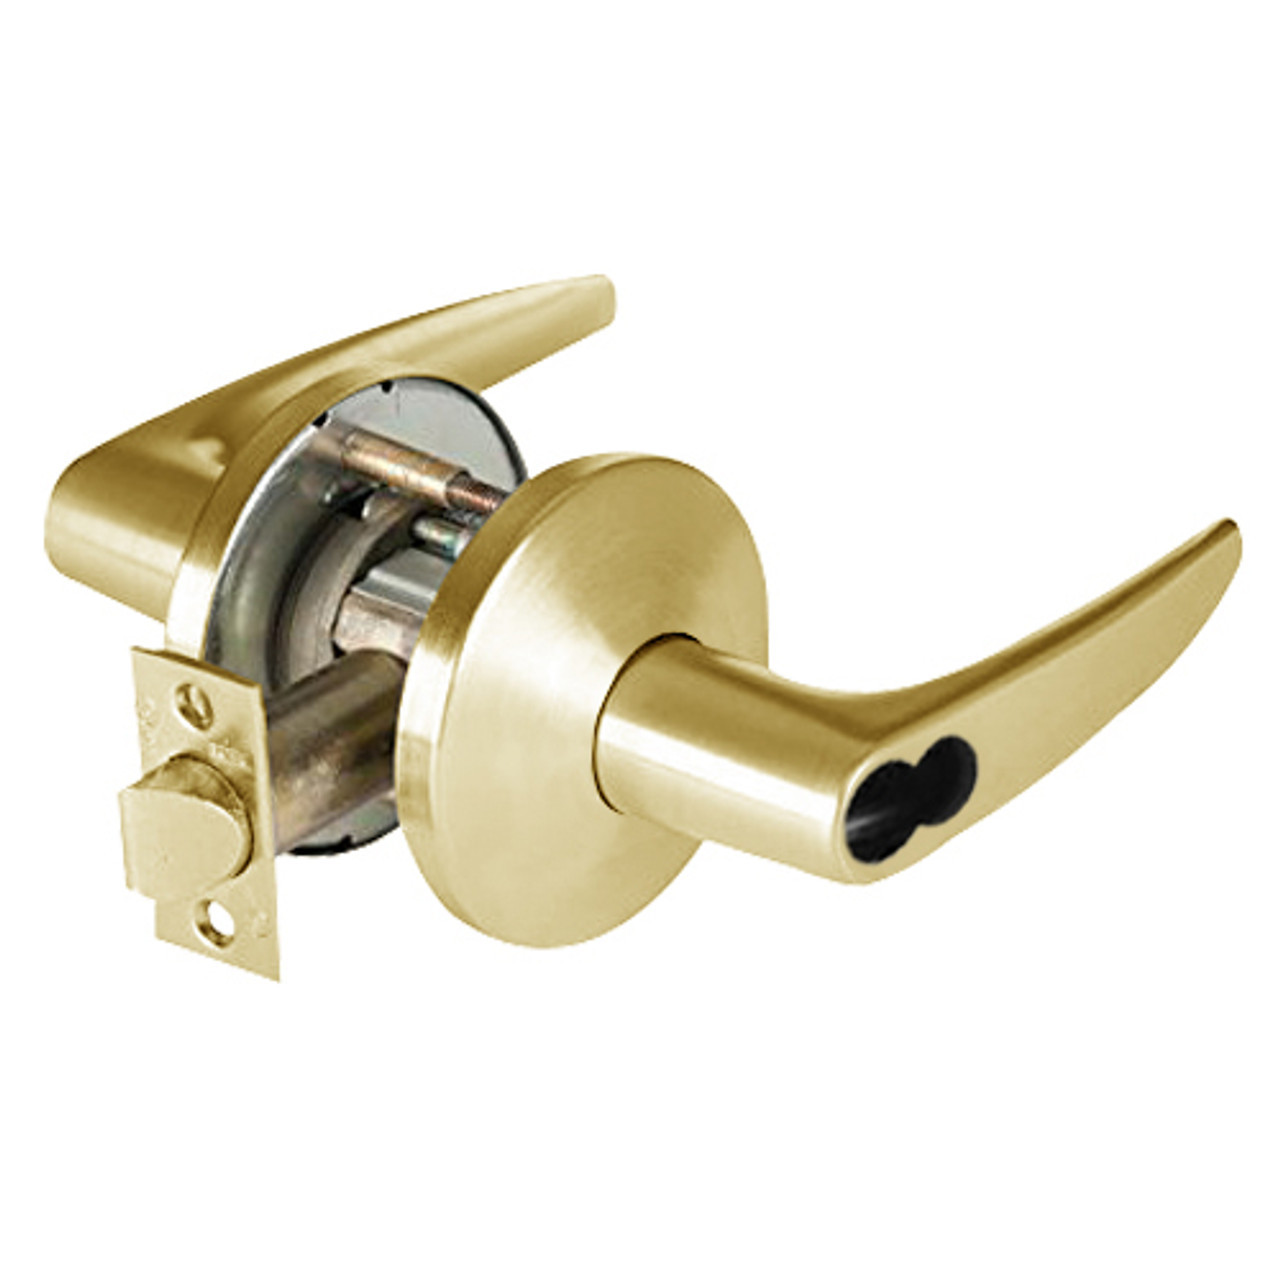 9K37E16LS3605LM Best 9K Series Service Station Cylindrical Lever Locks with Curved without Return Lever Design Accept 7 Pin Best Core in Bright Brass